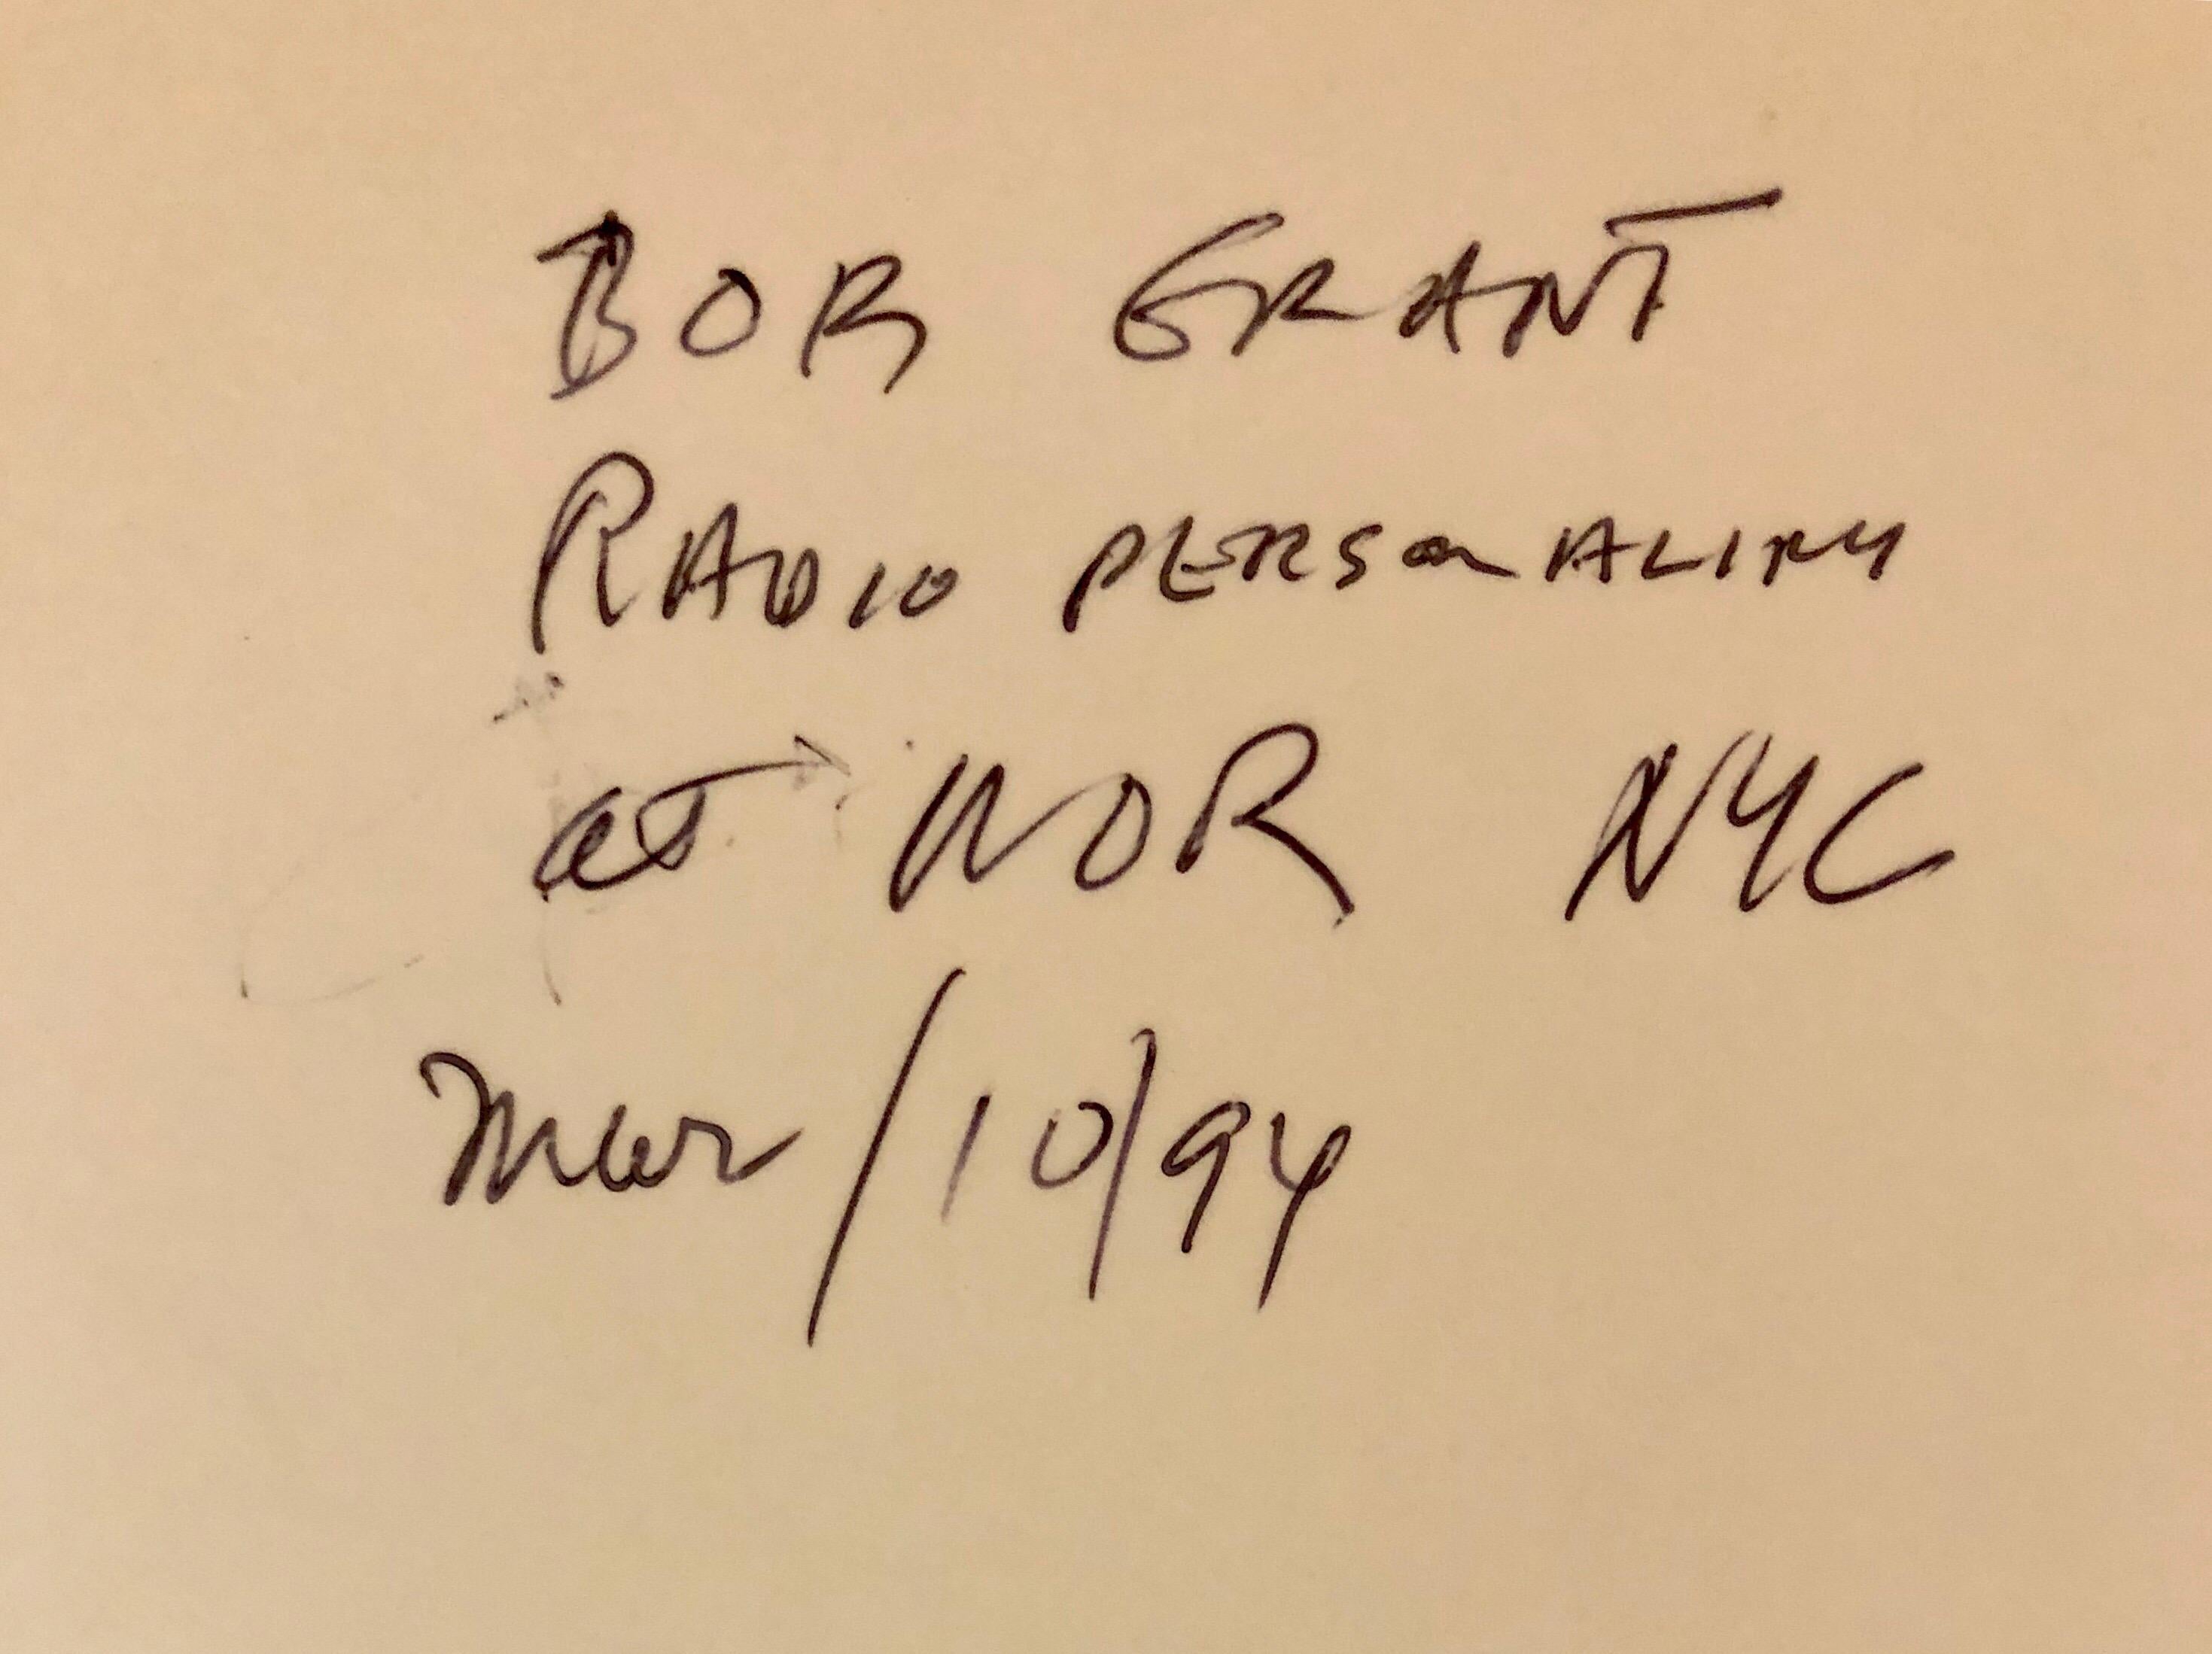 Bob Grant - Radio Personality at WOR NYC march 10, 1994
Photographer Fred McDarrah 

Over a 50-year span, McDarrah documented the rise of the Beat Generation, the city’s postmodern art movement, its off-off-Broadway actors, troubadours, politicians,